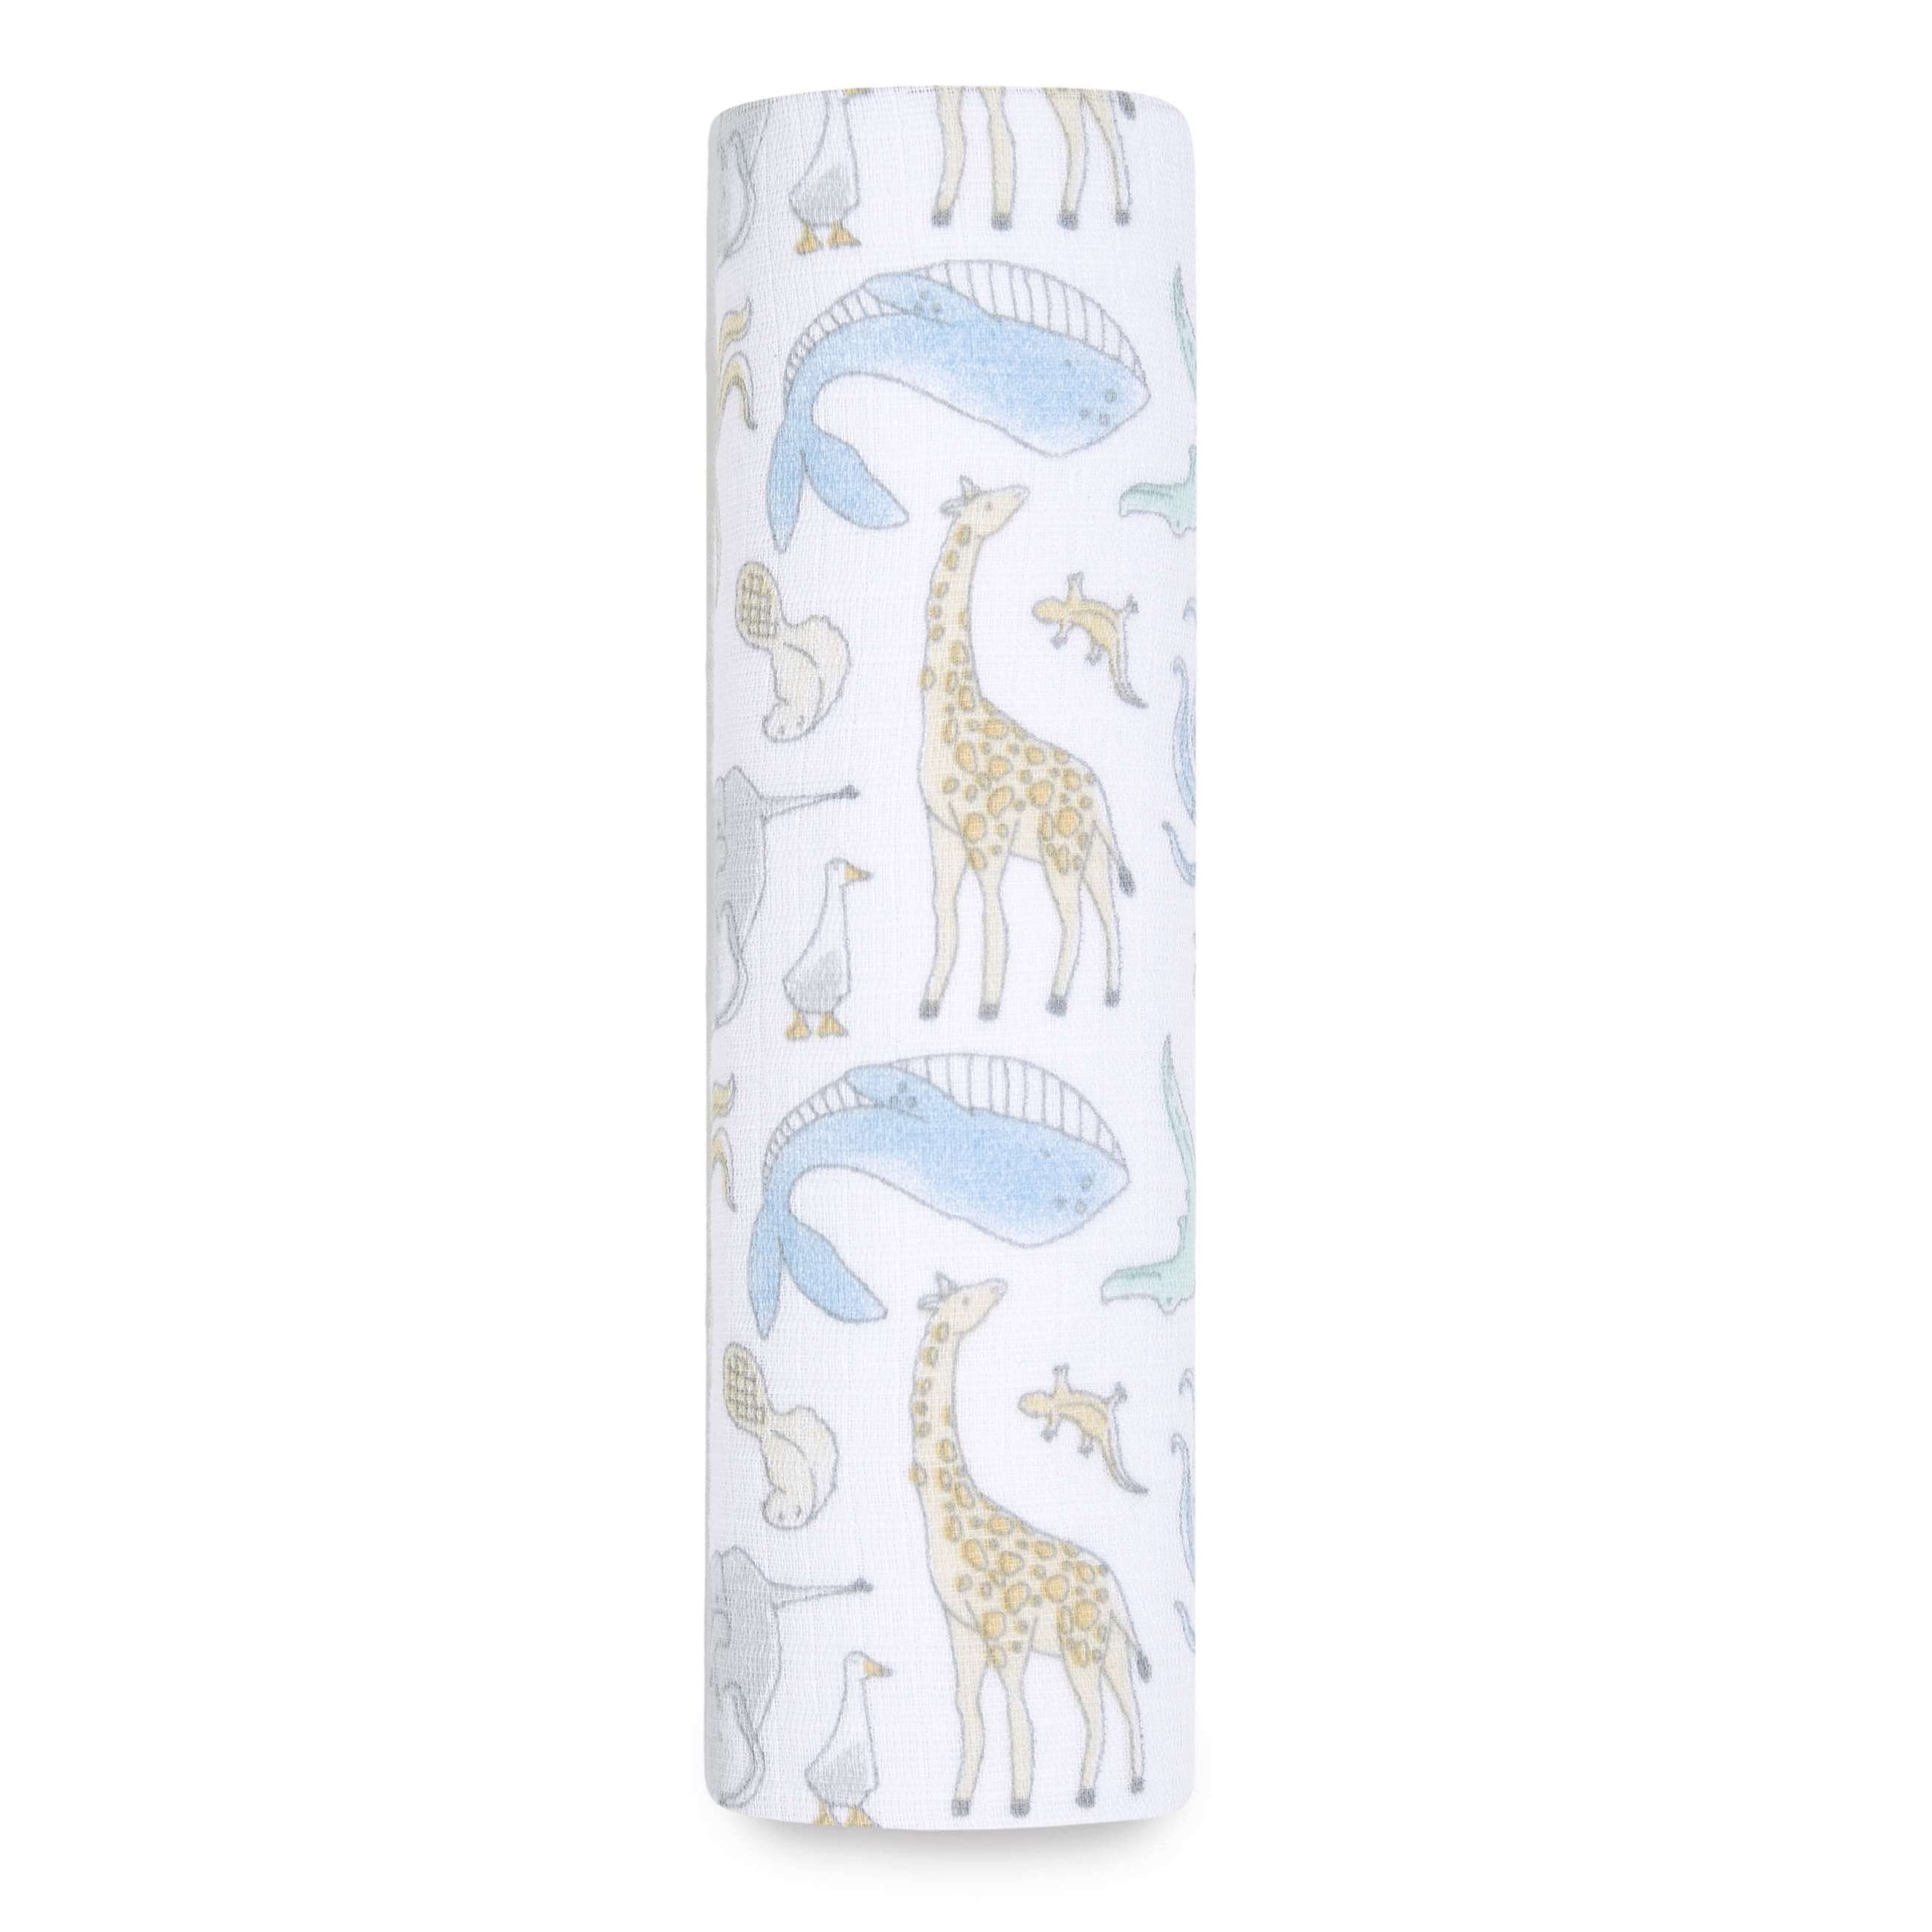 eswc10017_0-essentials-cotton-swaddle-natural-history-single